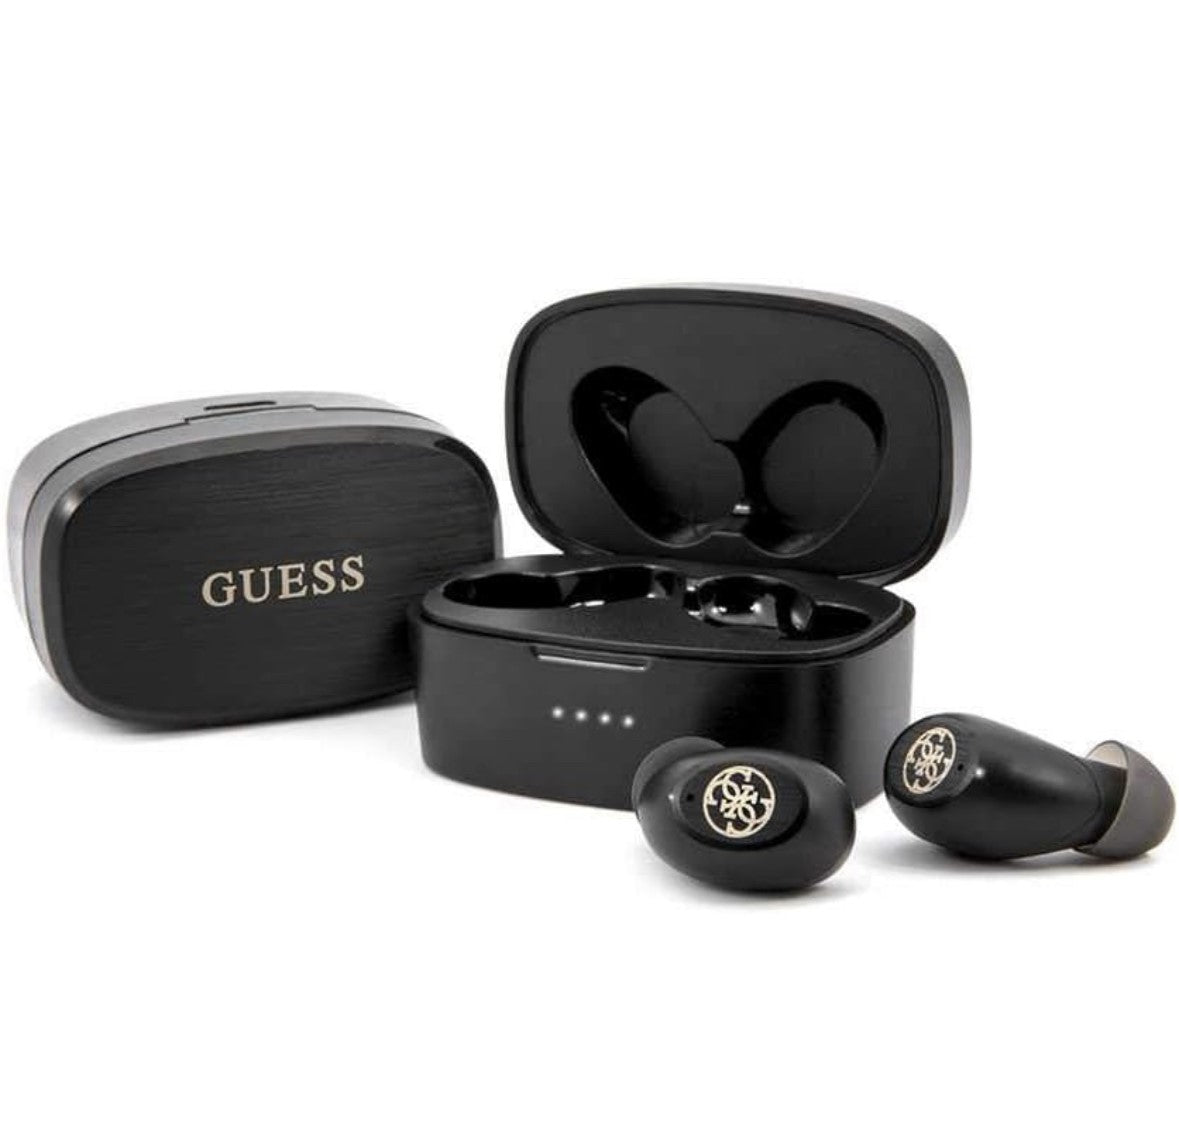 Guess Wireless Bluetooth Stereo Headset - black